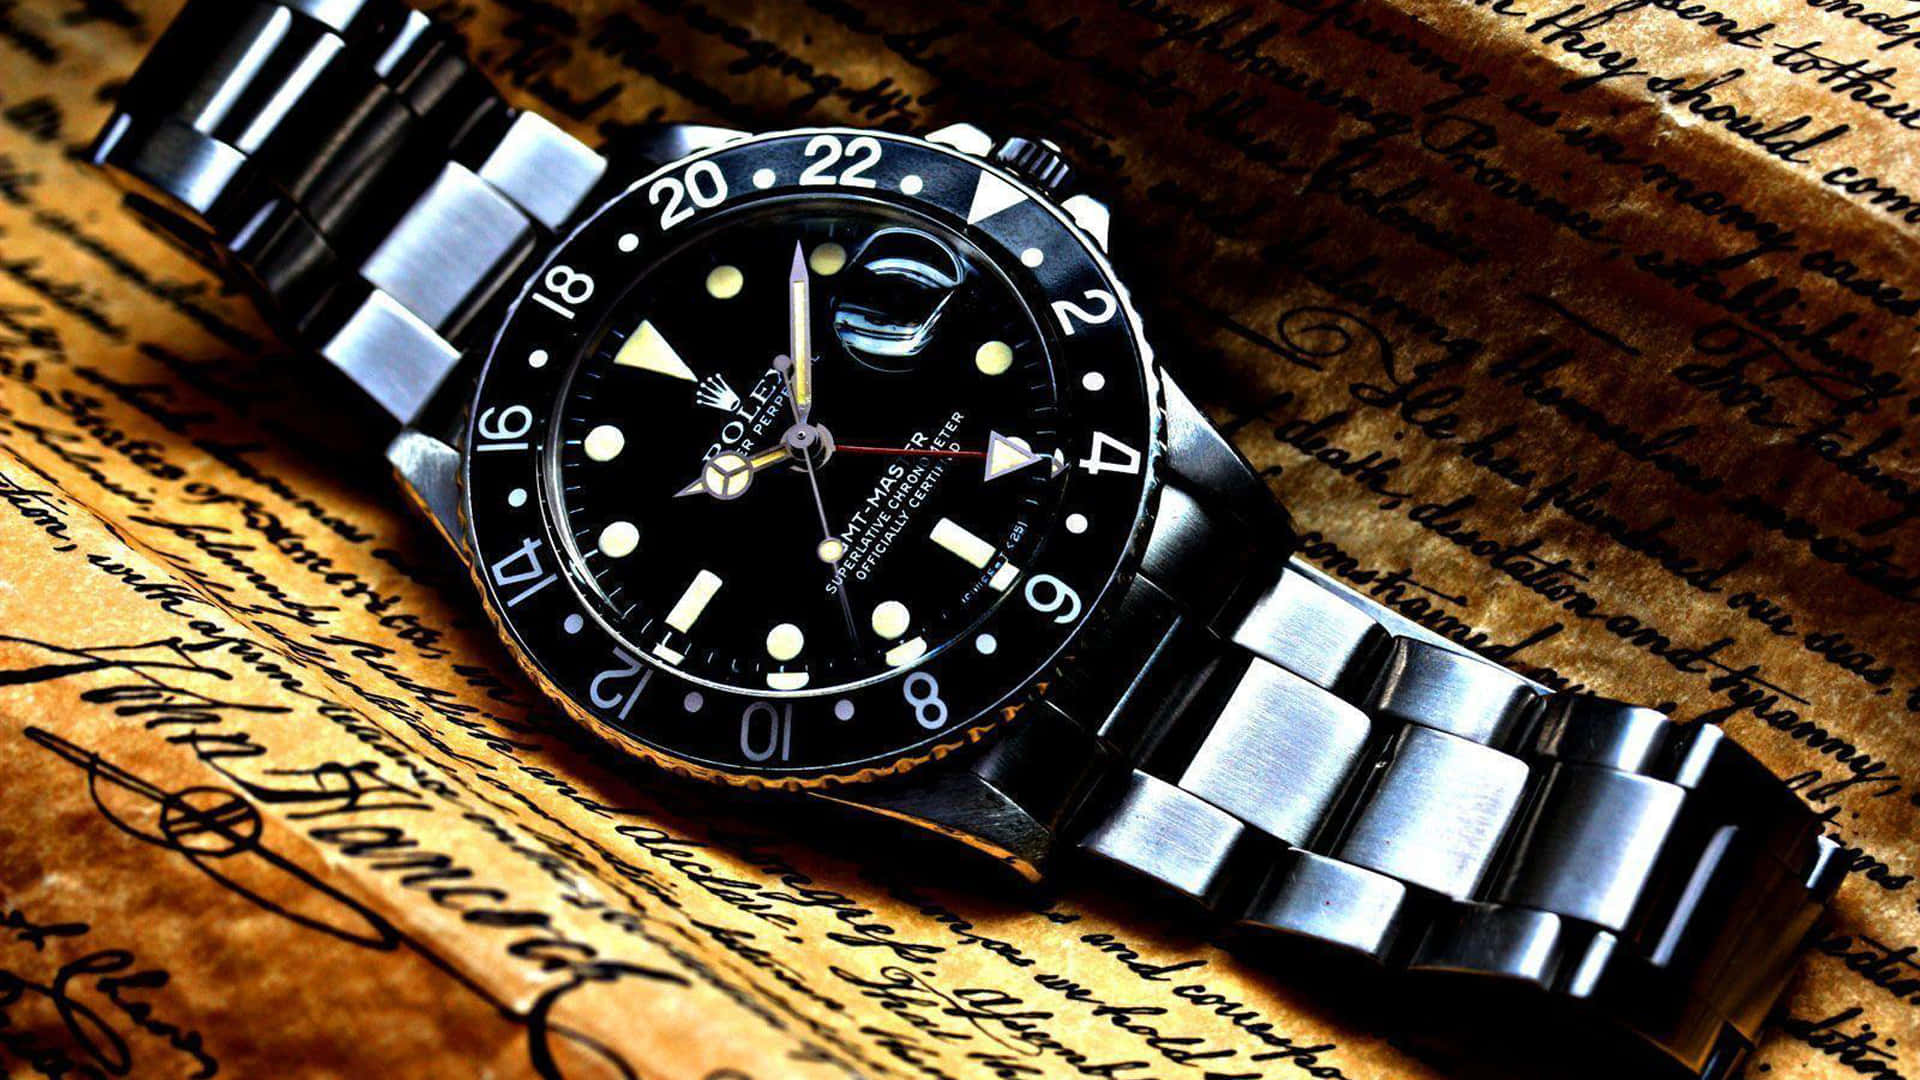 Luxurious Rolex Watches Displayed Side by Side